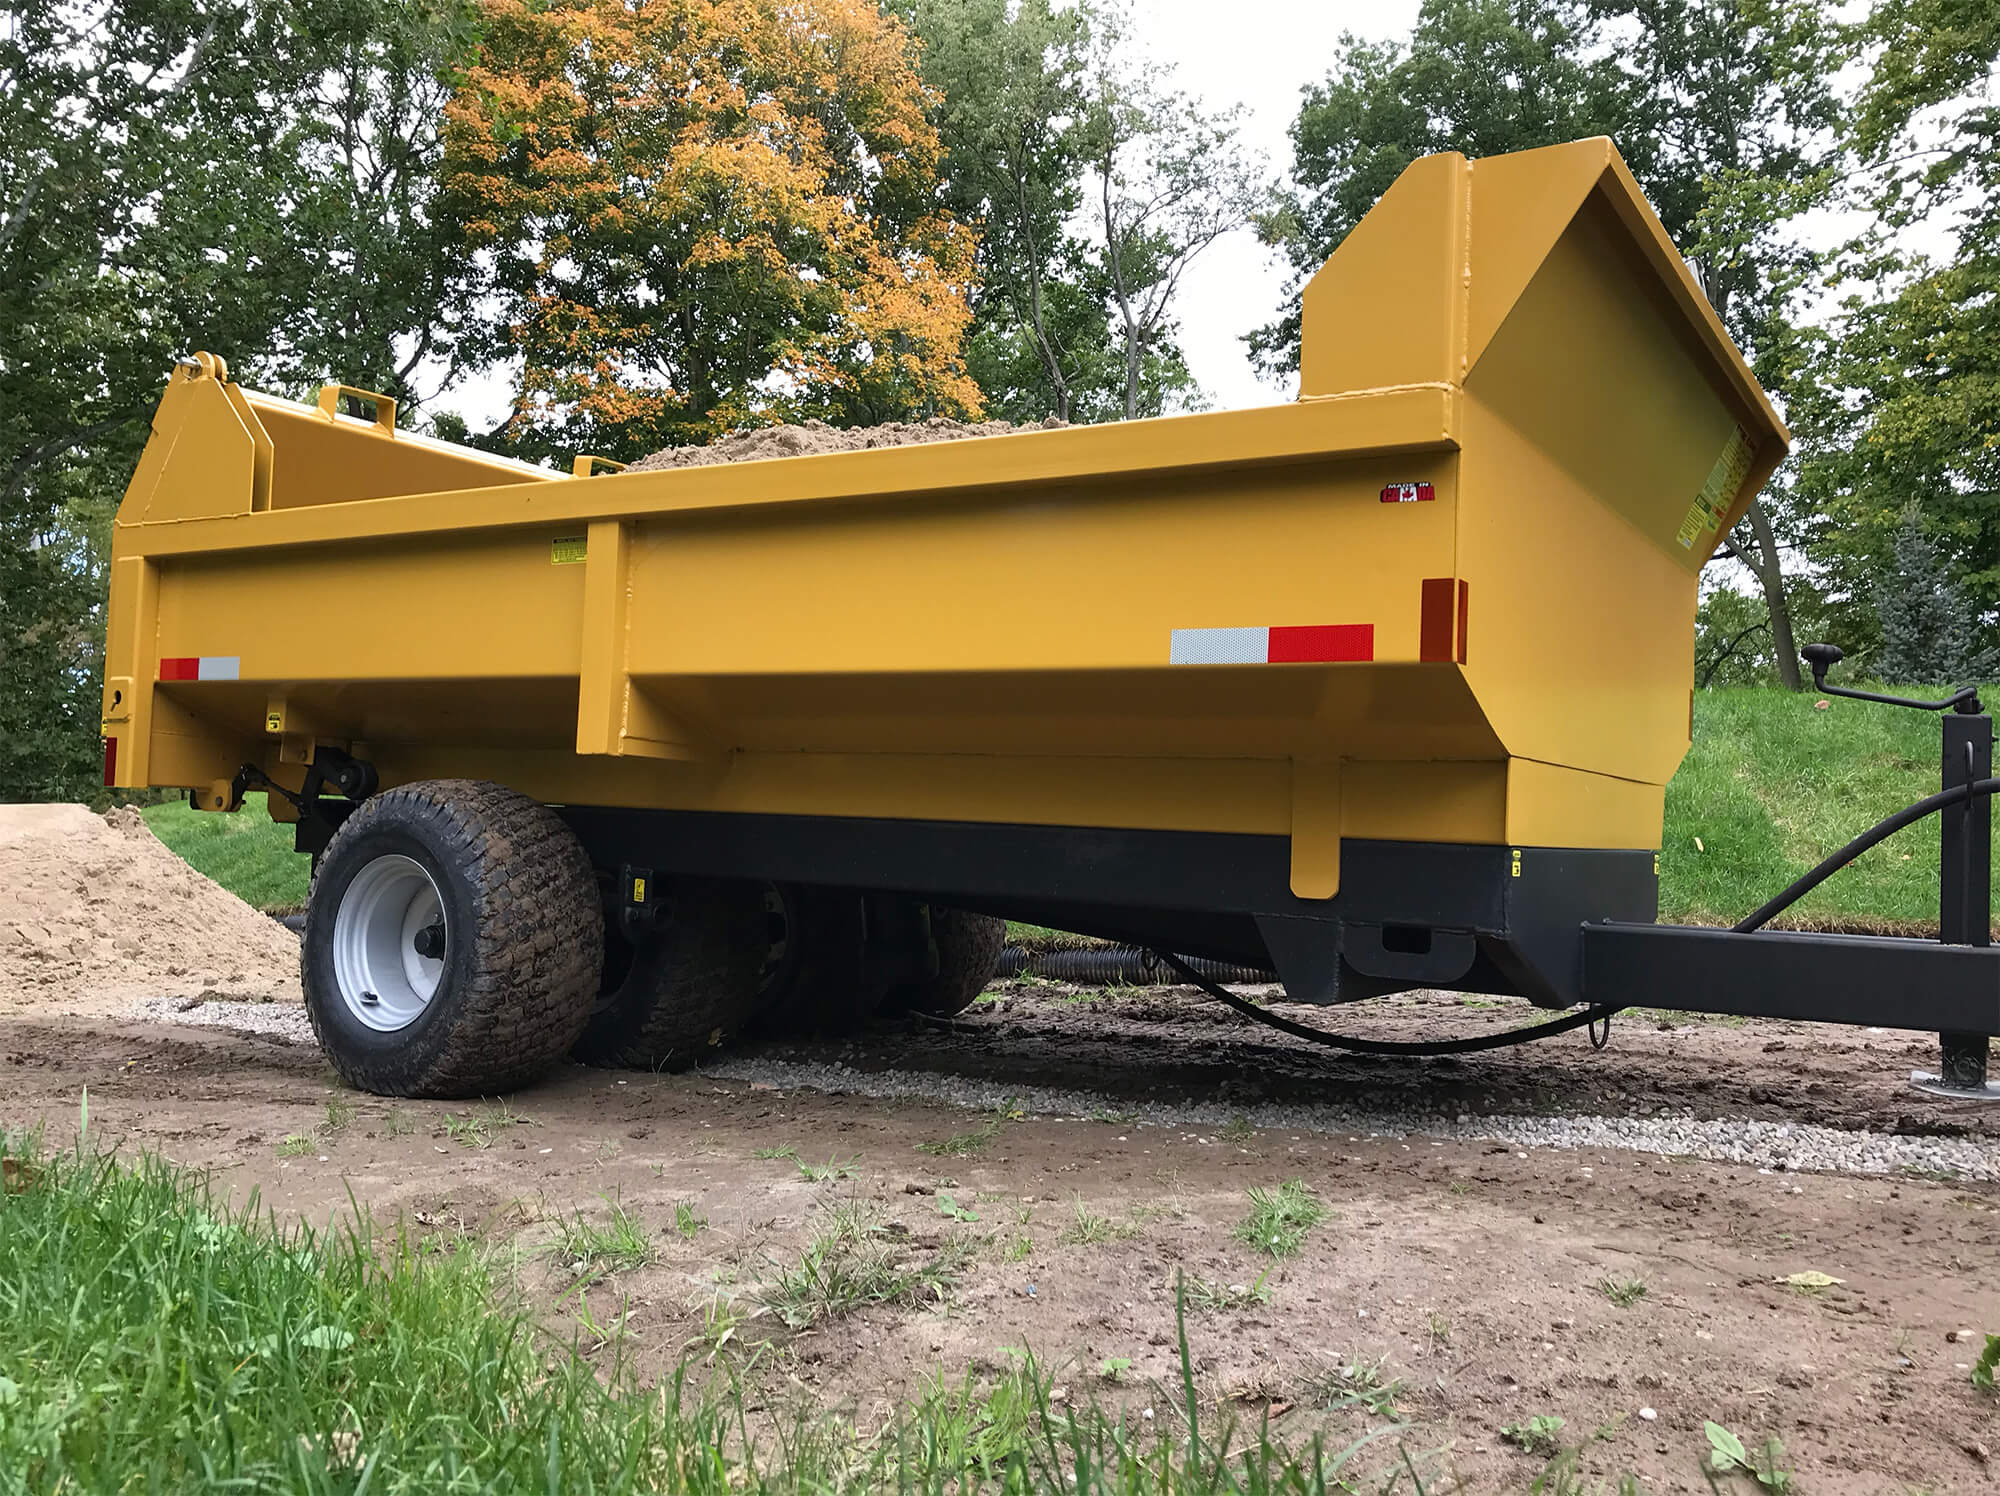 a side profile of the turf dumpster trailer